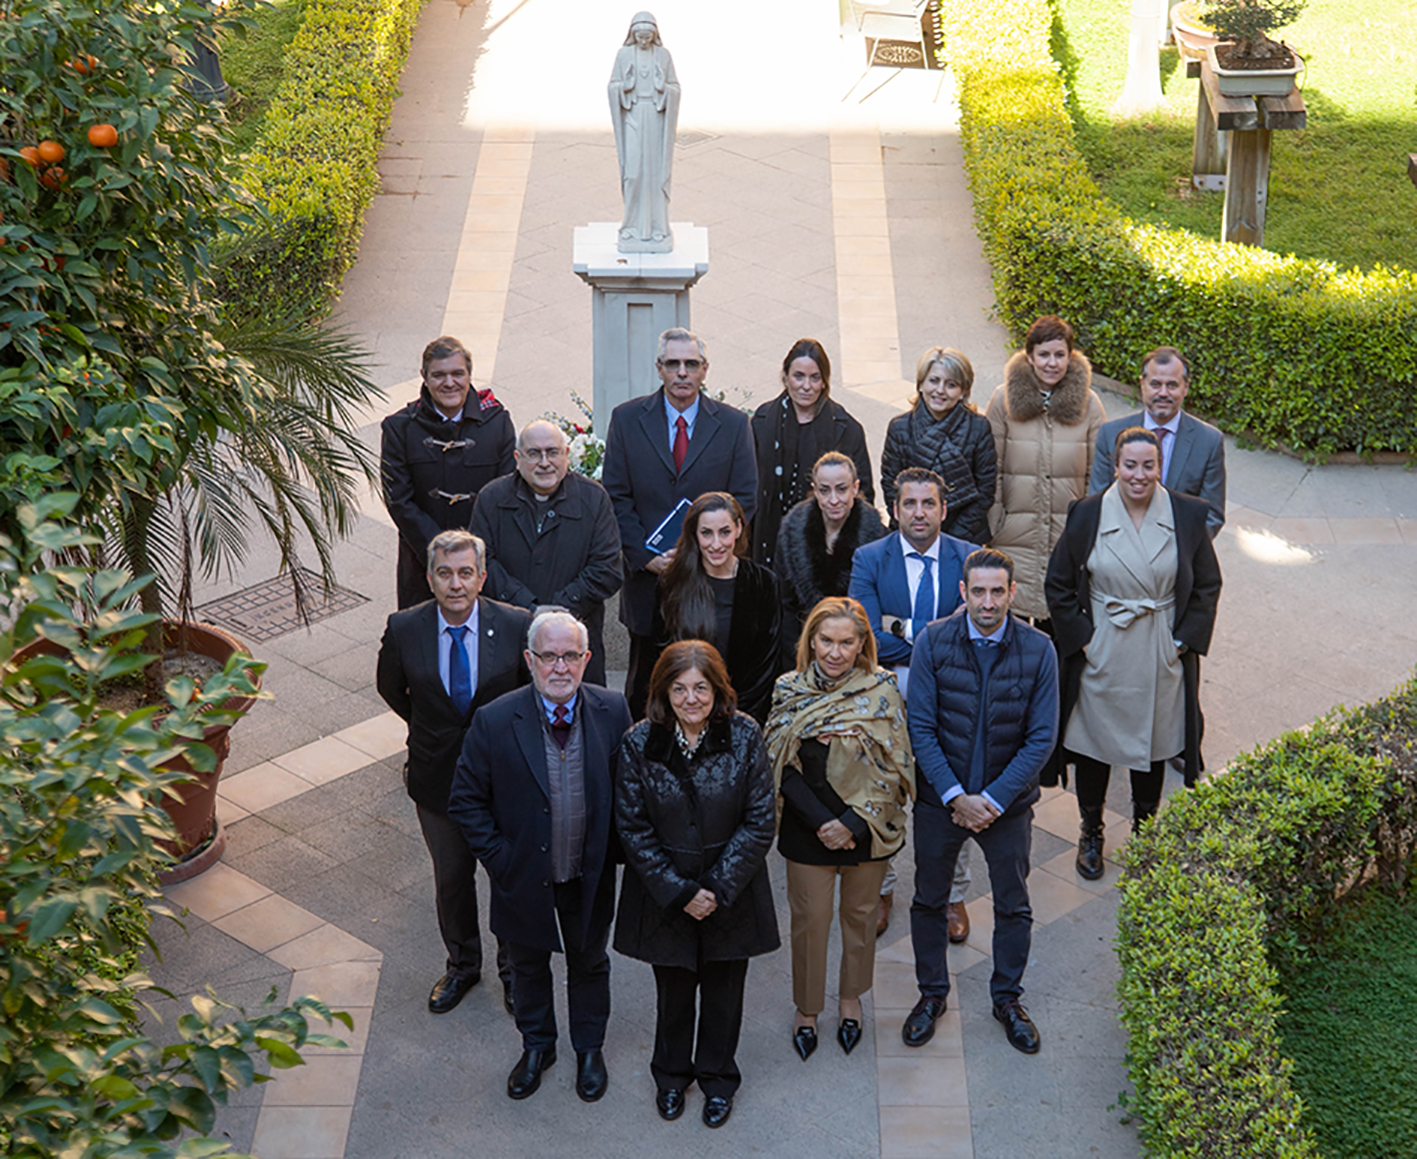 The members of the Board of Trustees of the San Antonio University Foundation and of the UCAM University Council. 